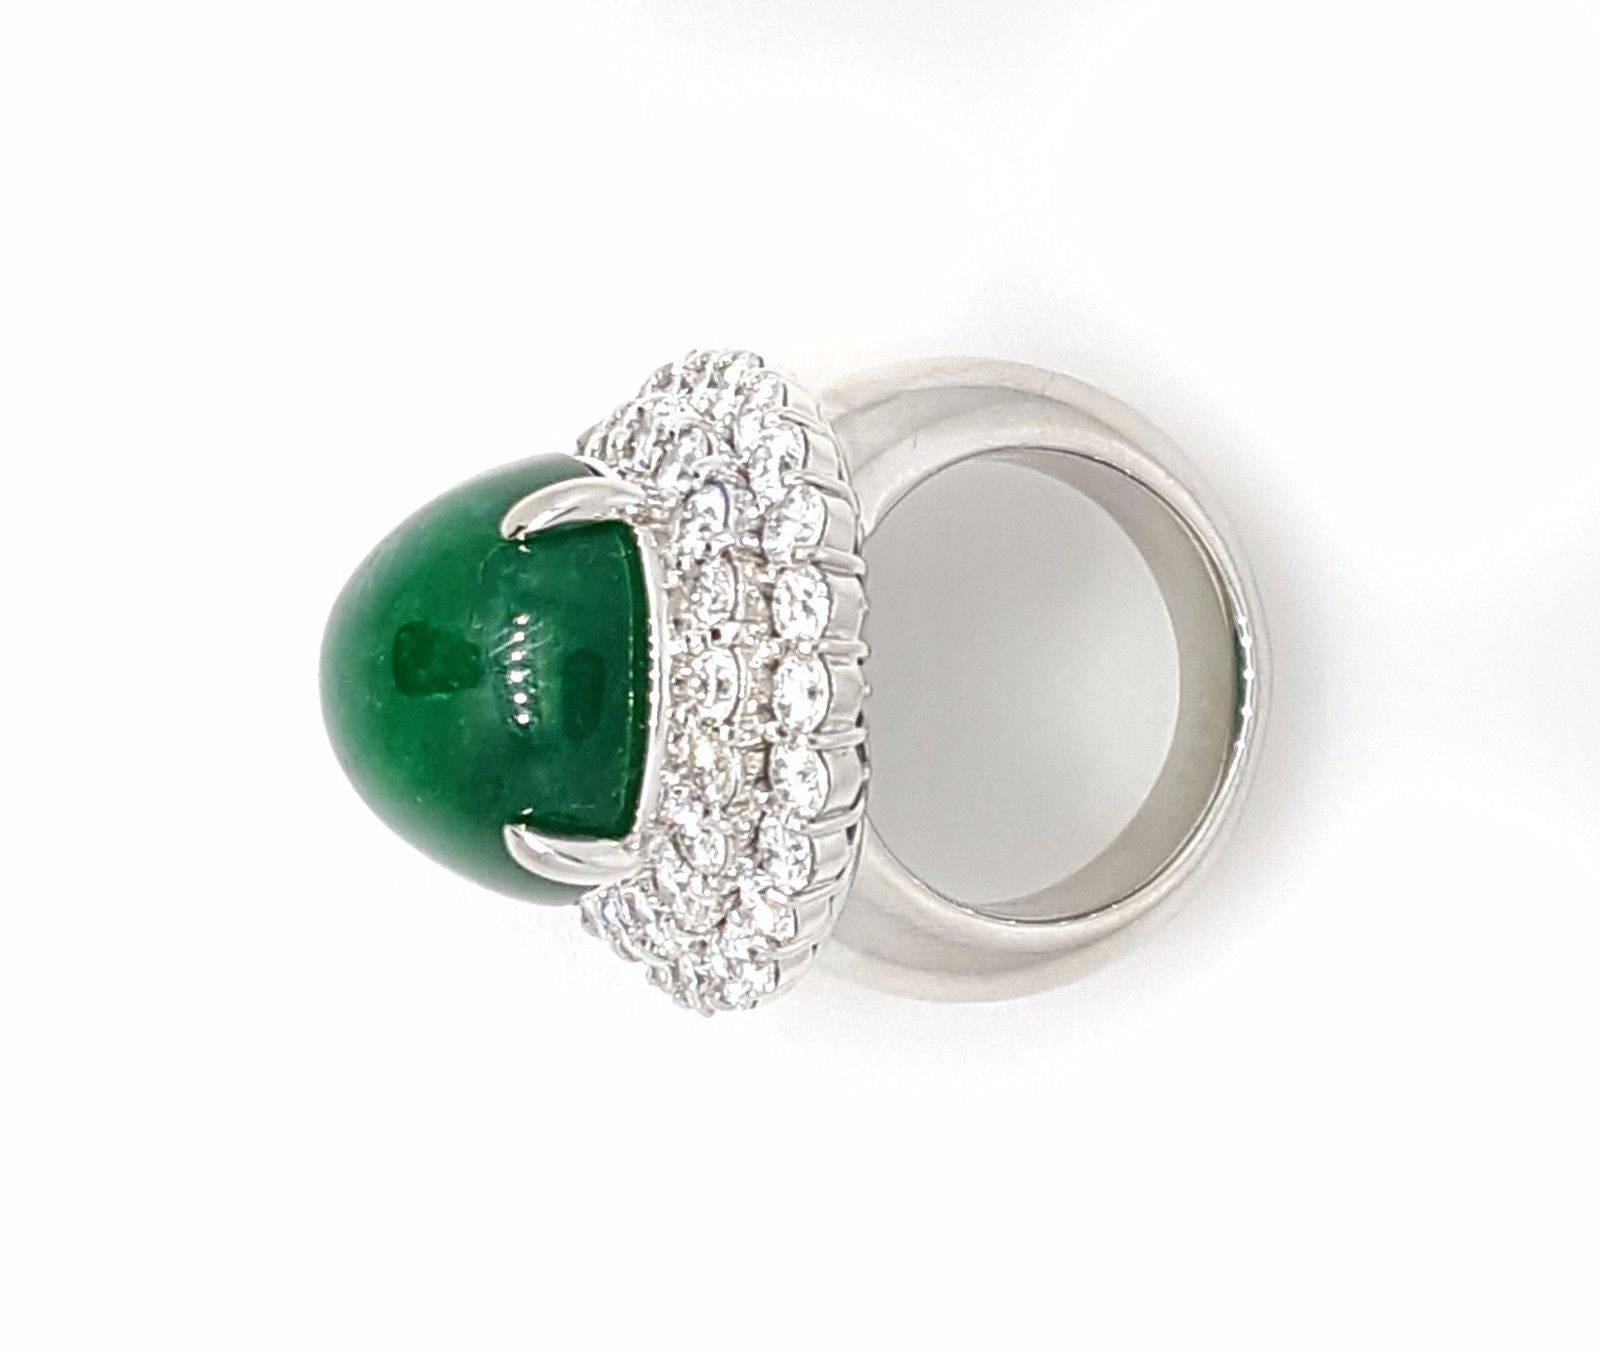 24 Carat Emerald Cabochon Ring with 4.50 Carat of Diamonds in Platinum In Excellent Condition For Sale In La Jolla, CA